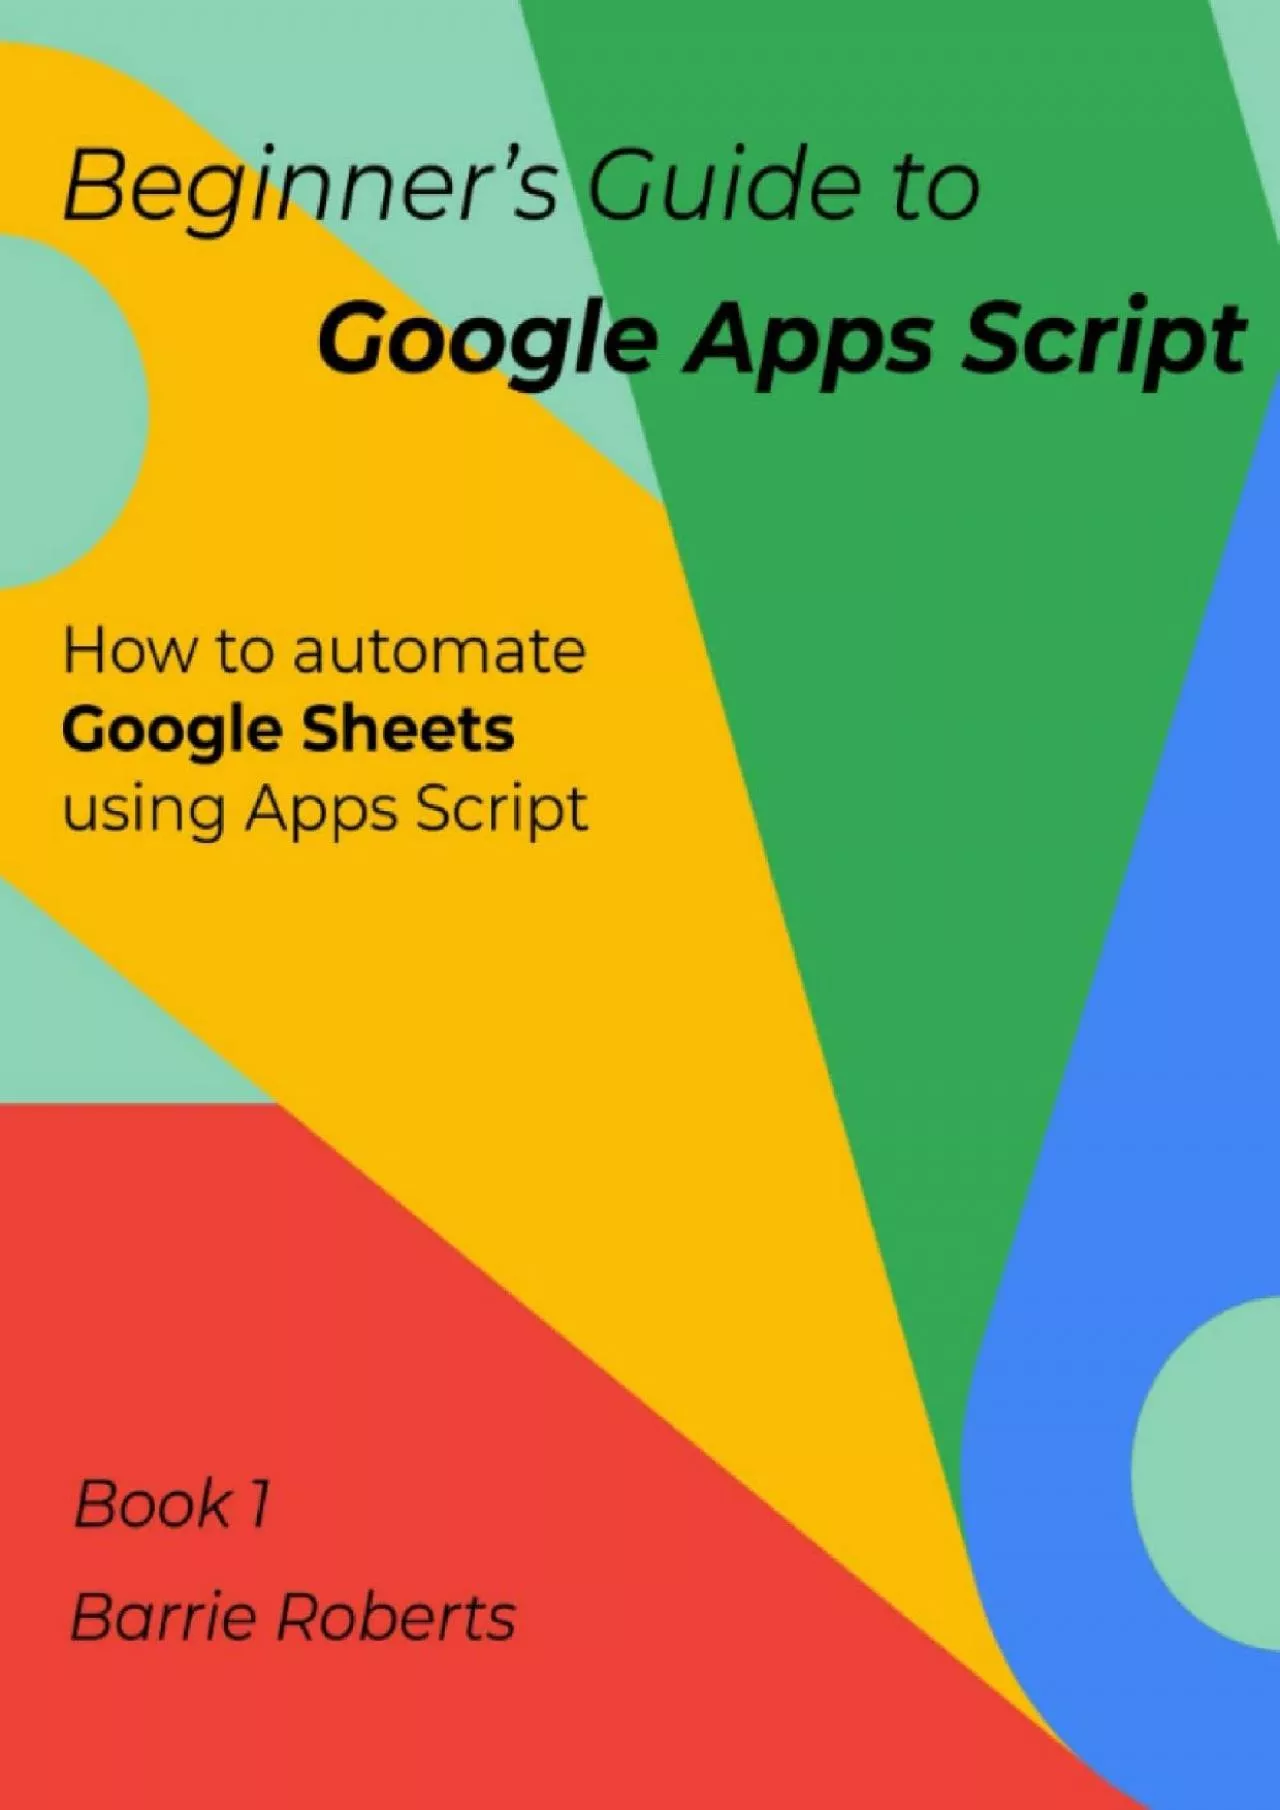 Beginner\'s Guide to Google Apps Script 1 - Sheets (Step-by-step guides to Google Apps